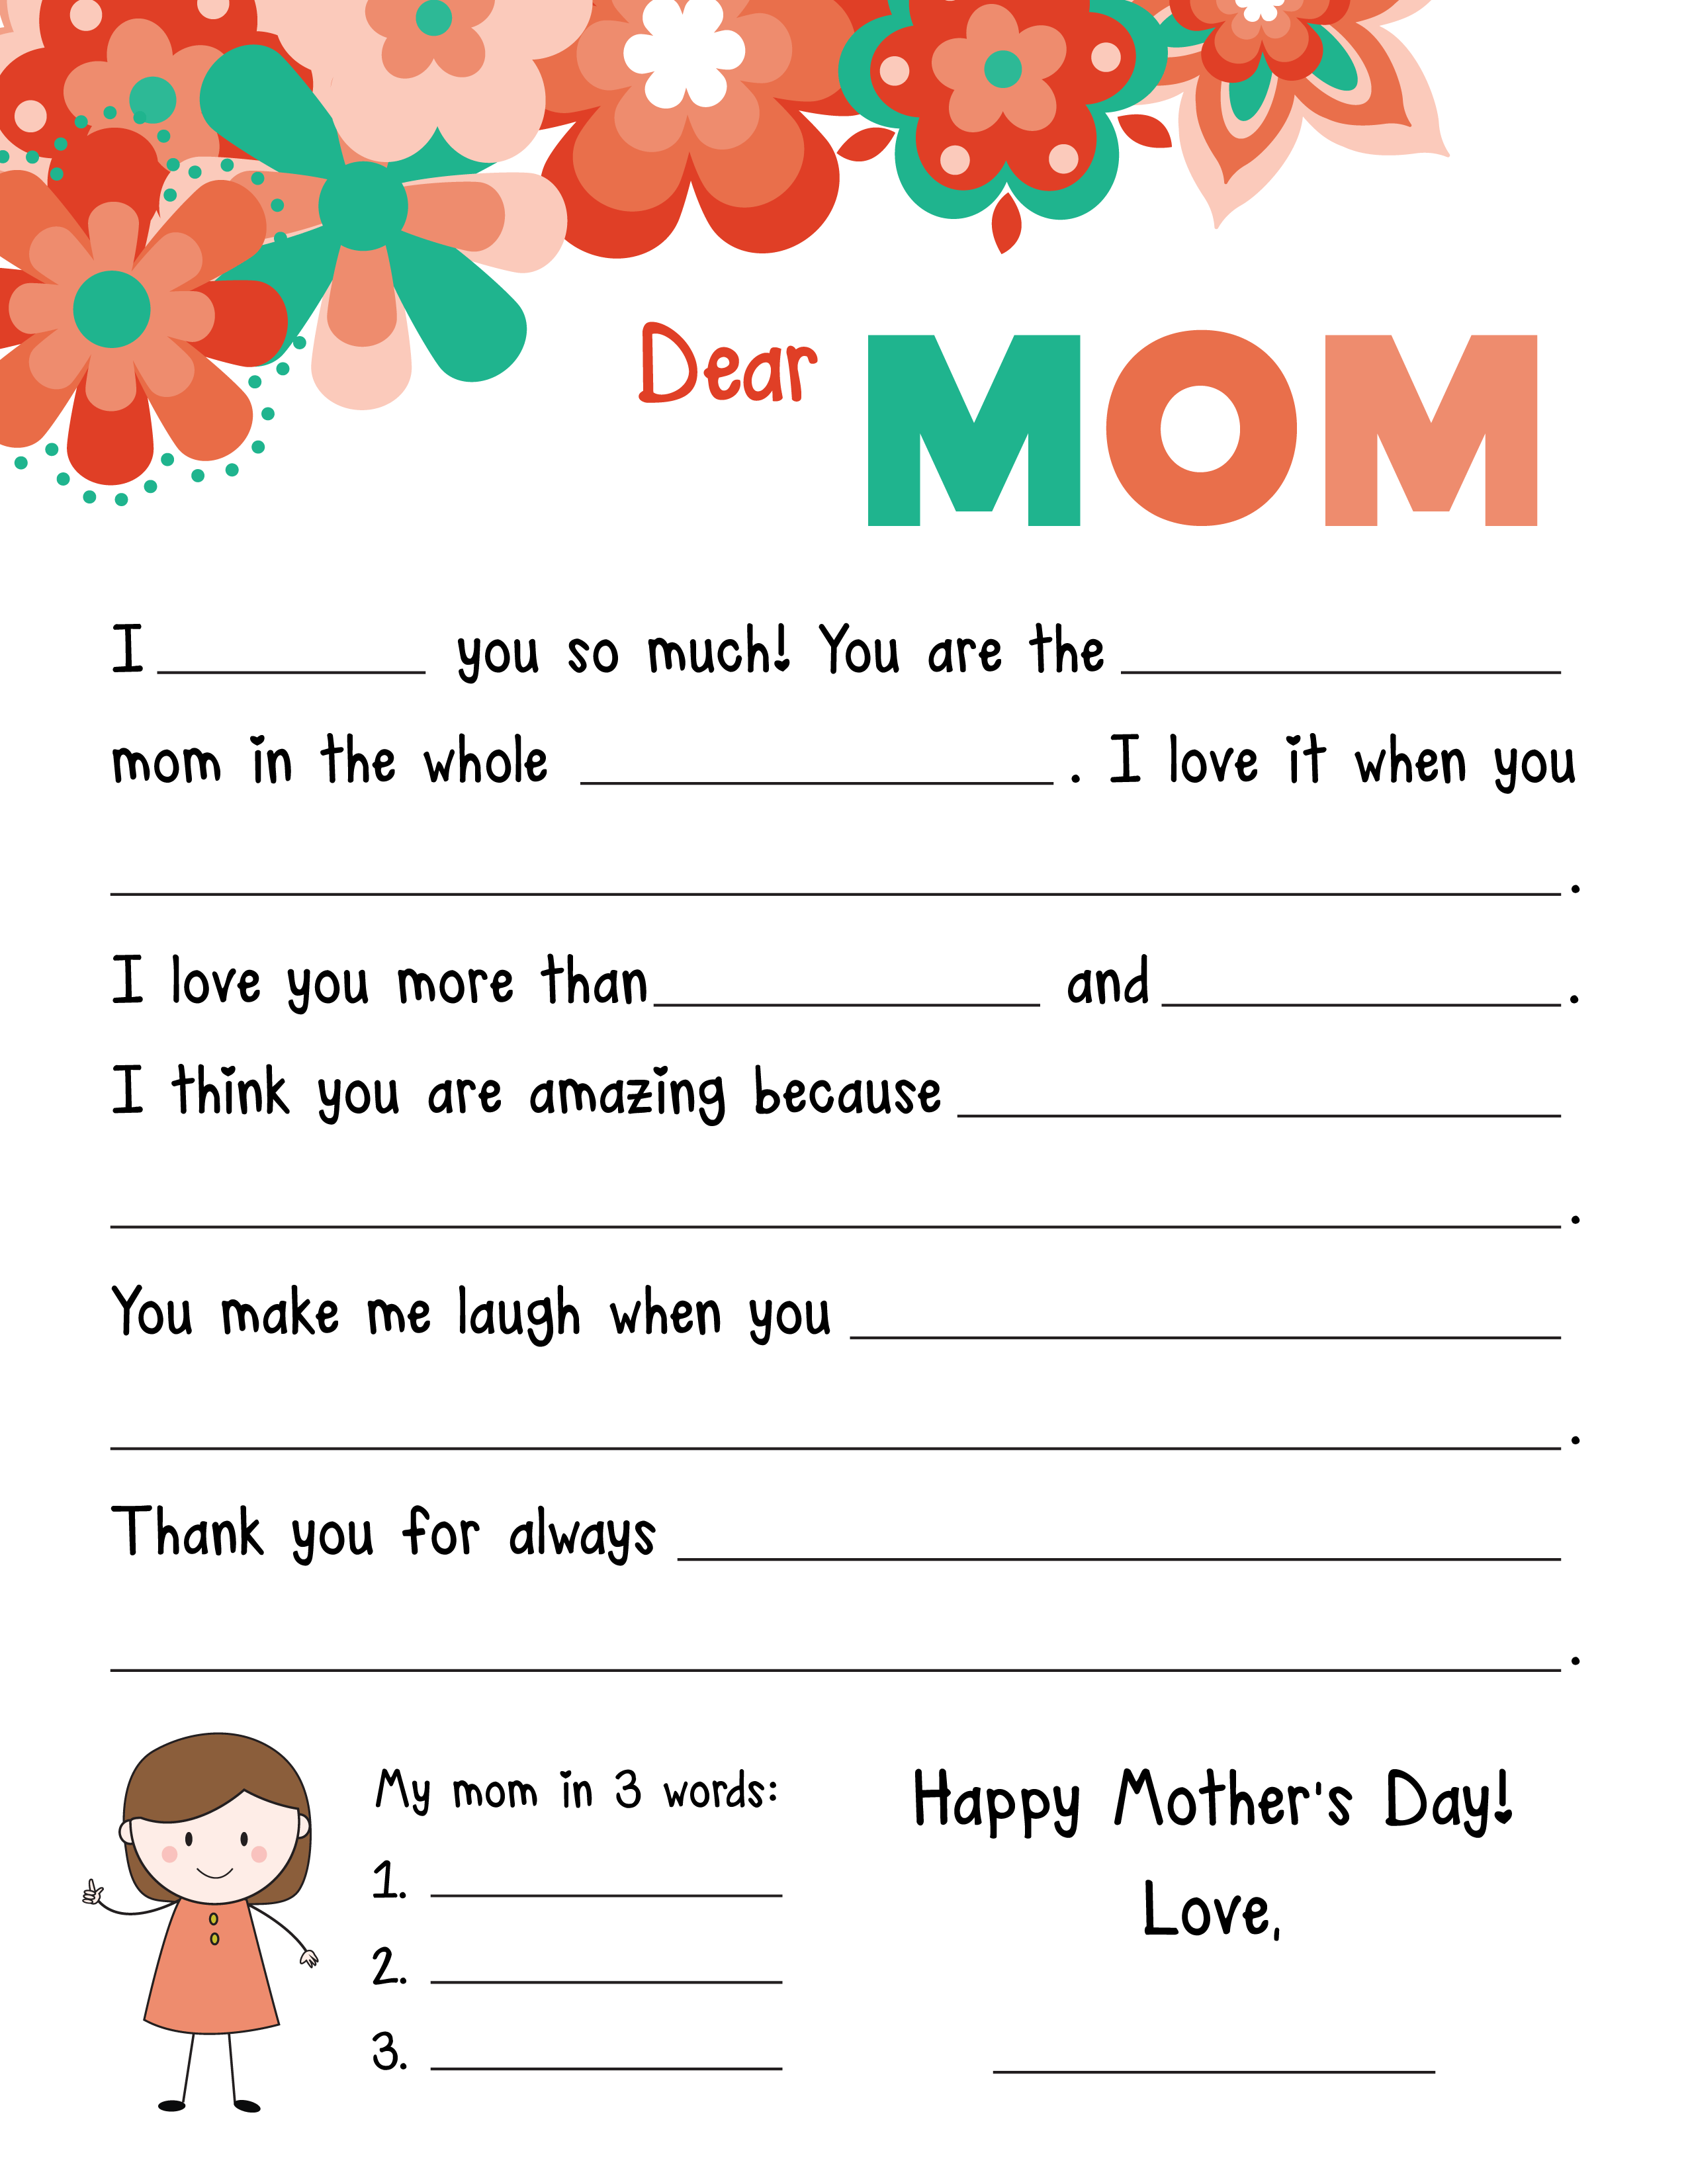 printable Mother's Day card in color